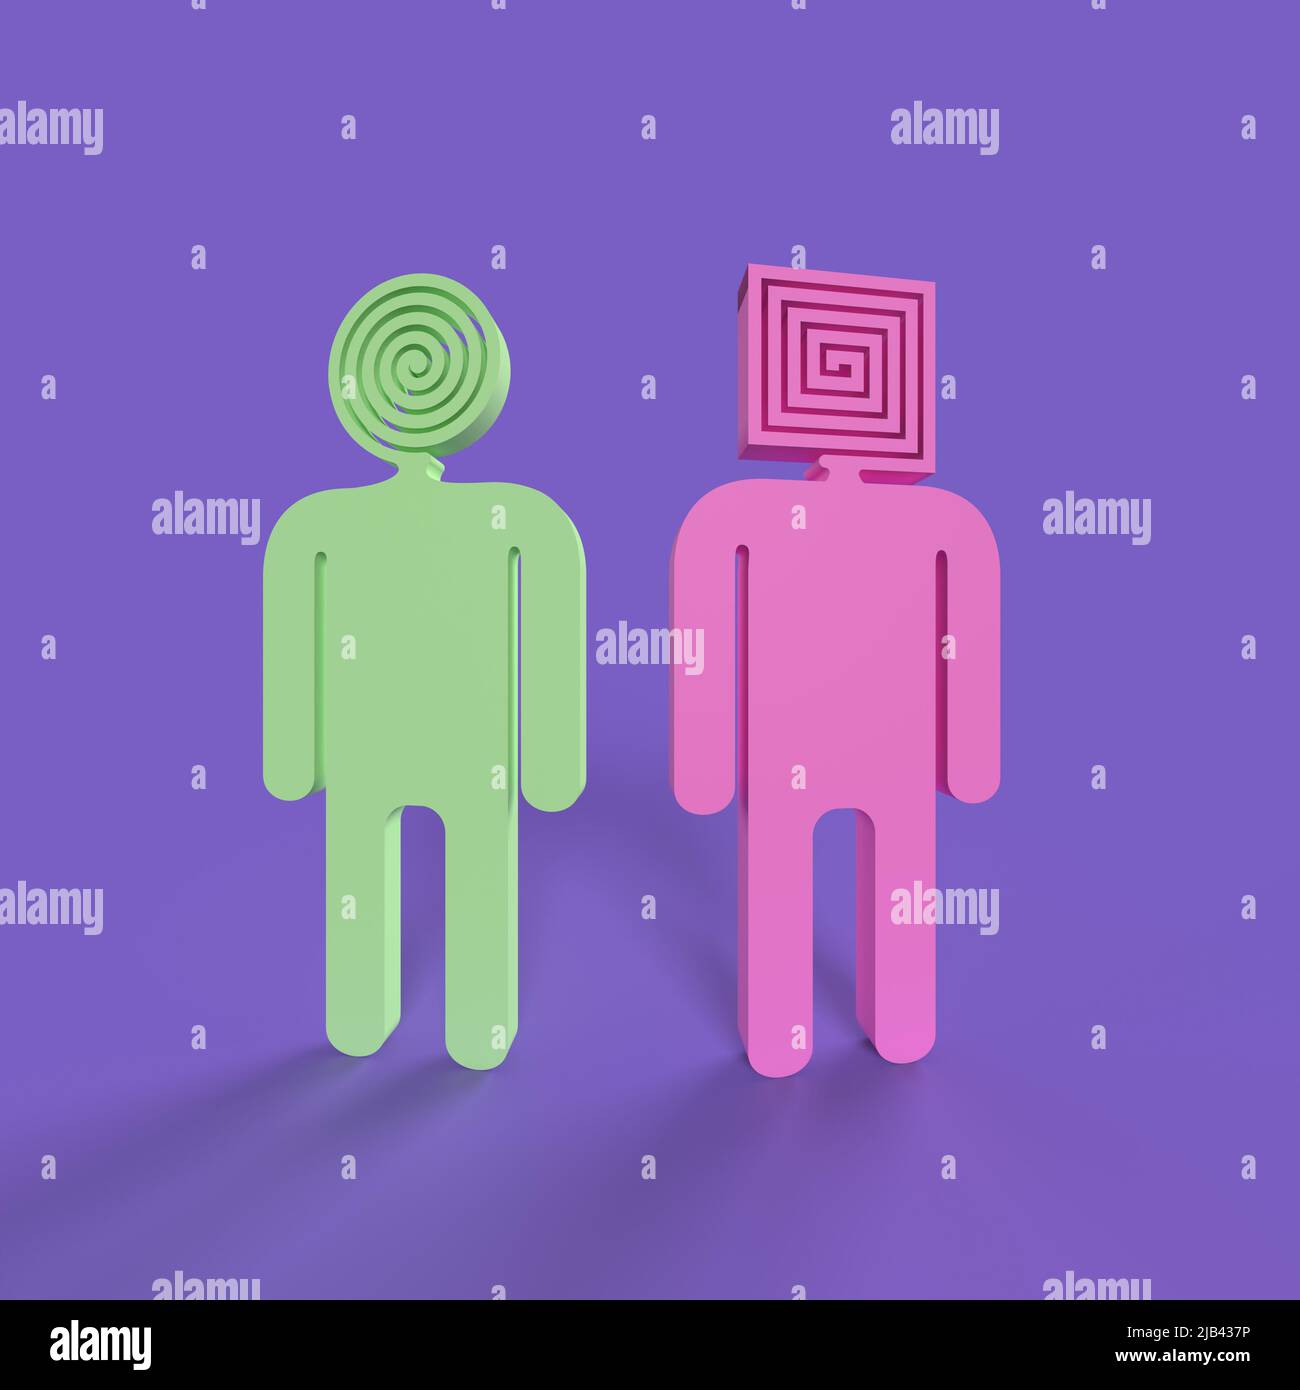 two people with opposite mindsets  and personalities - 3d illustration Stock Photo